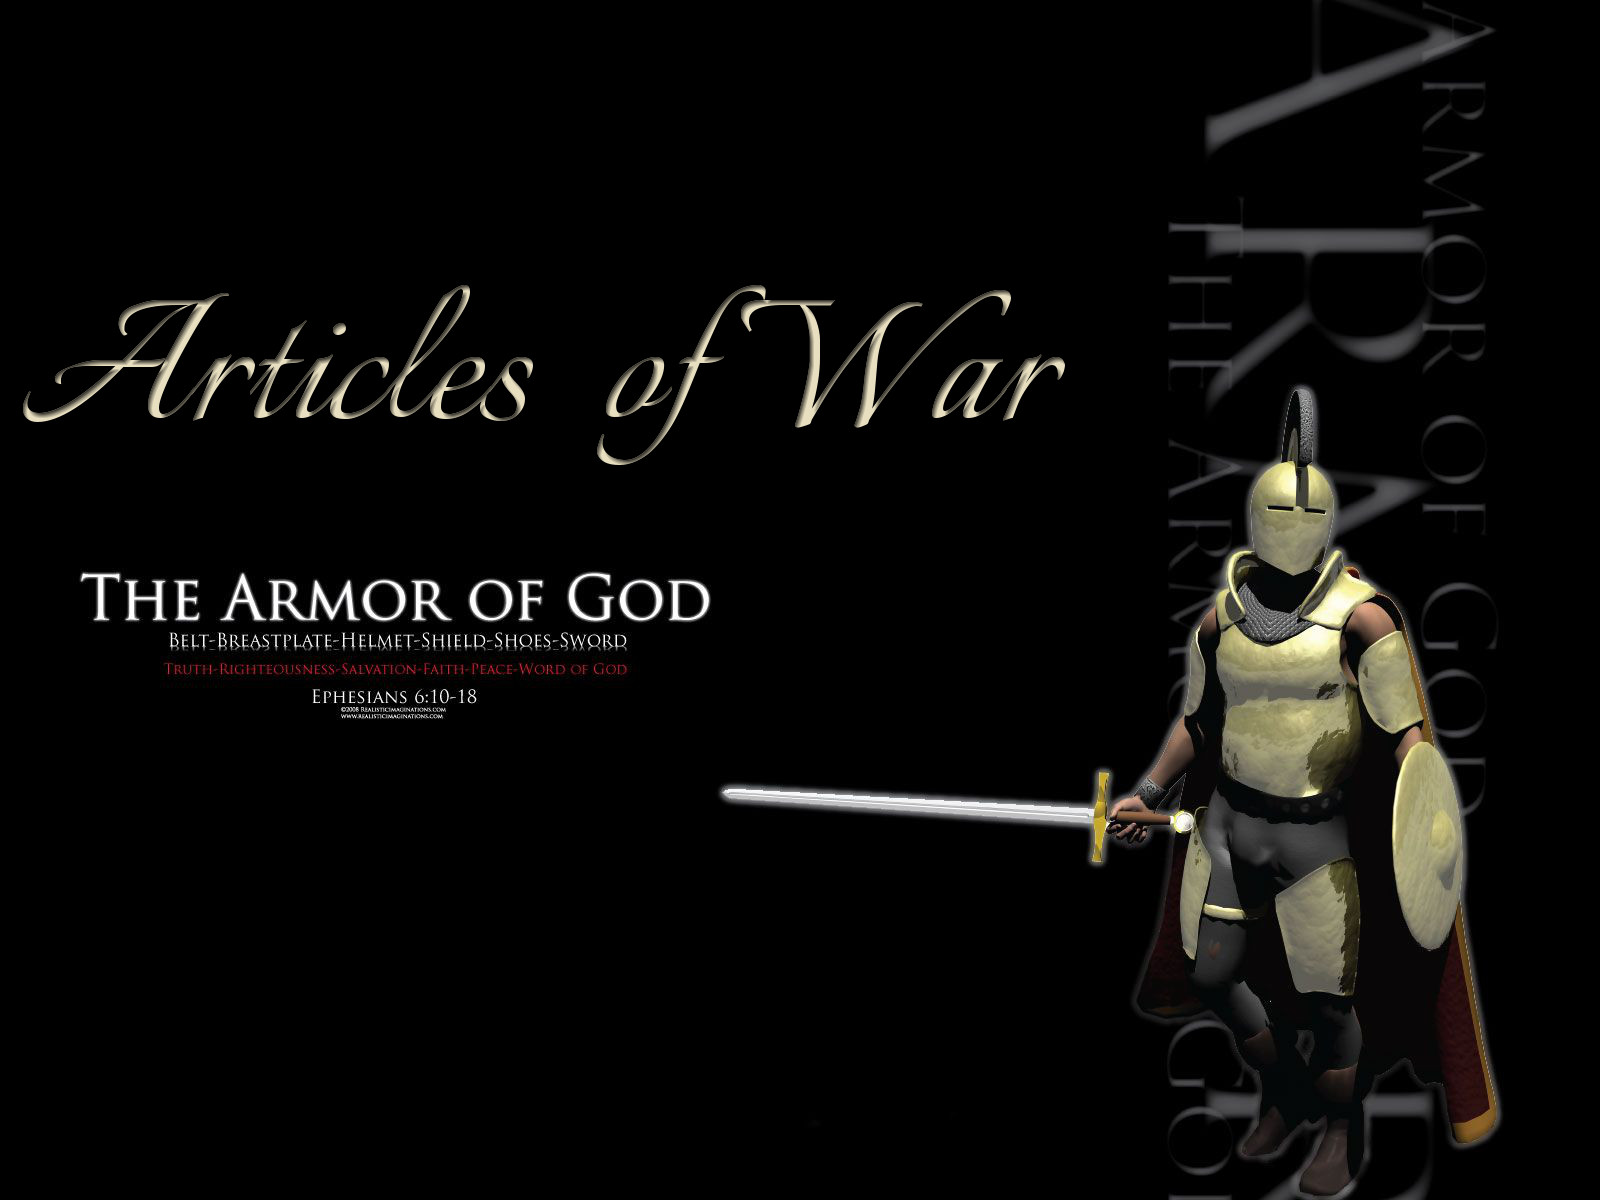 armor-of-god-black-christian-and-backgrounds